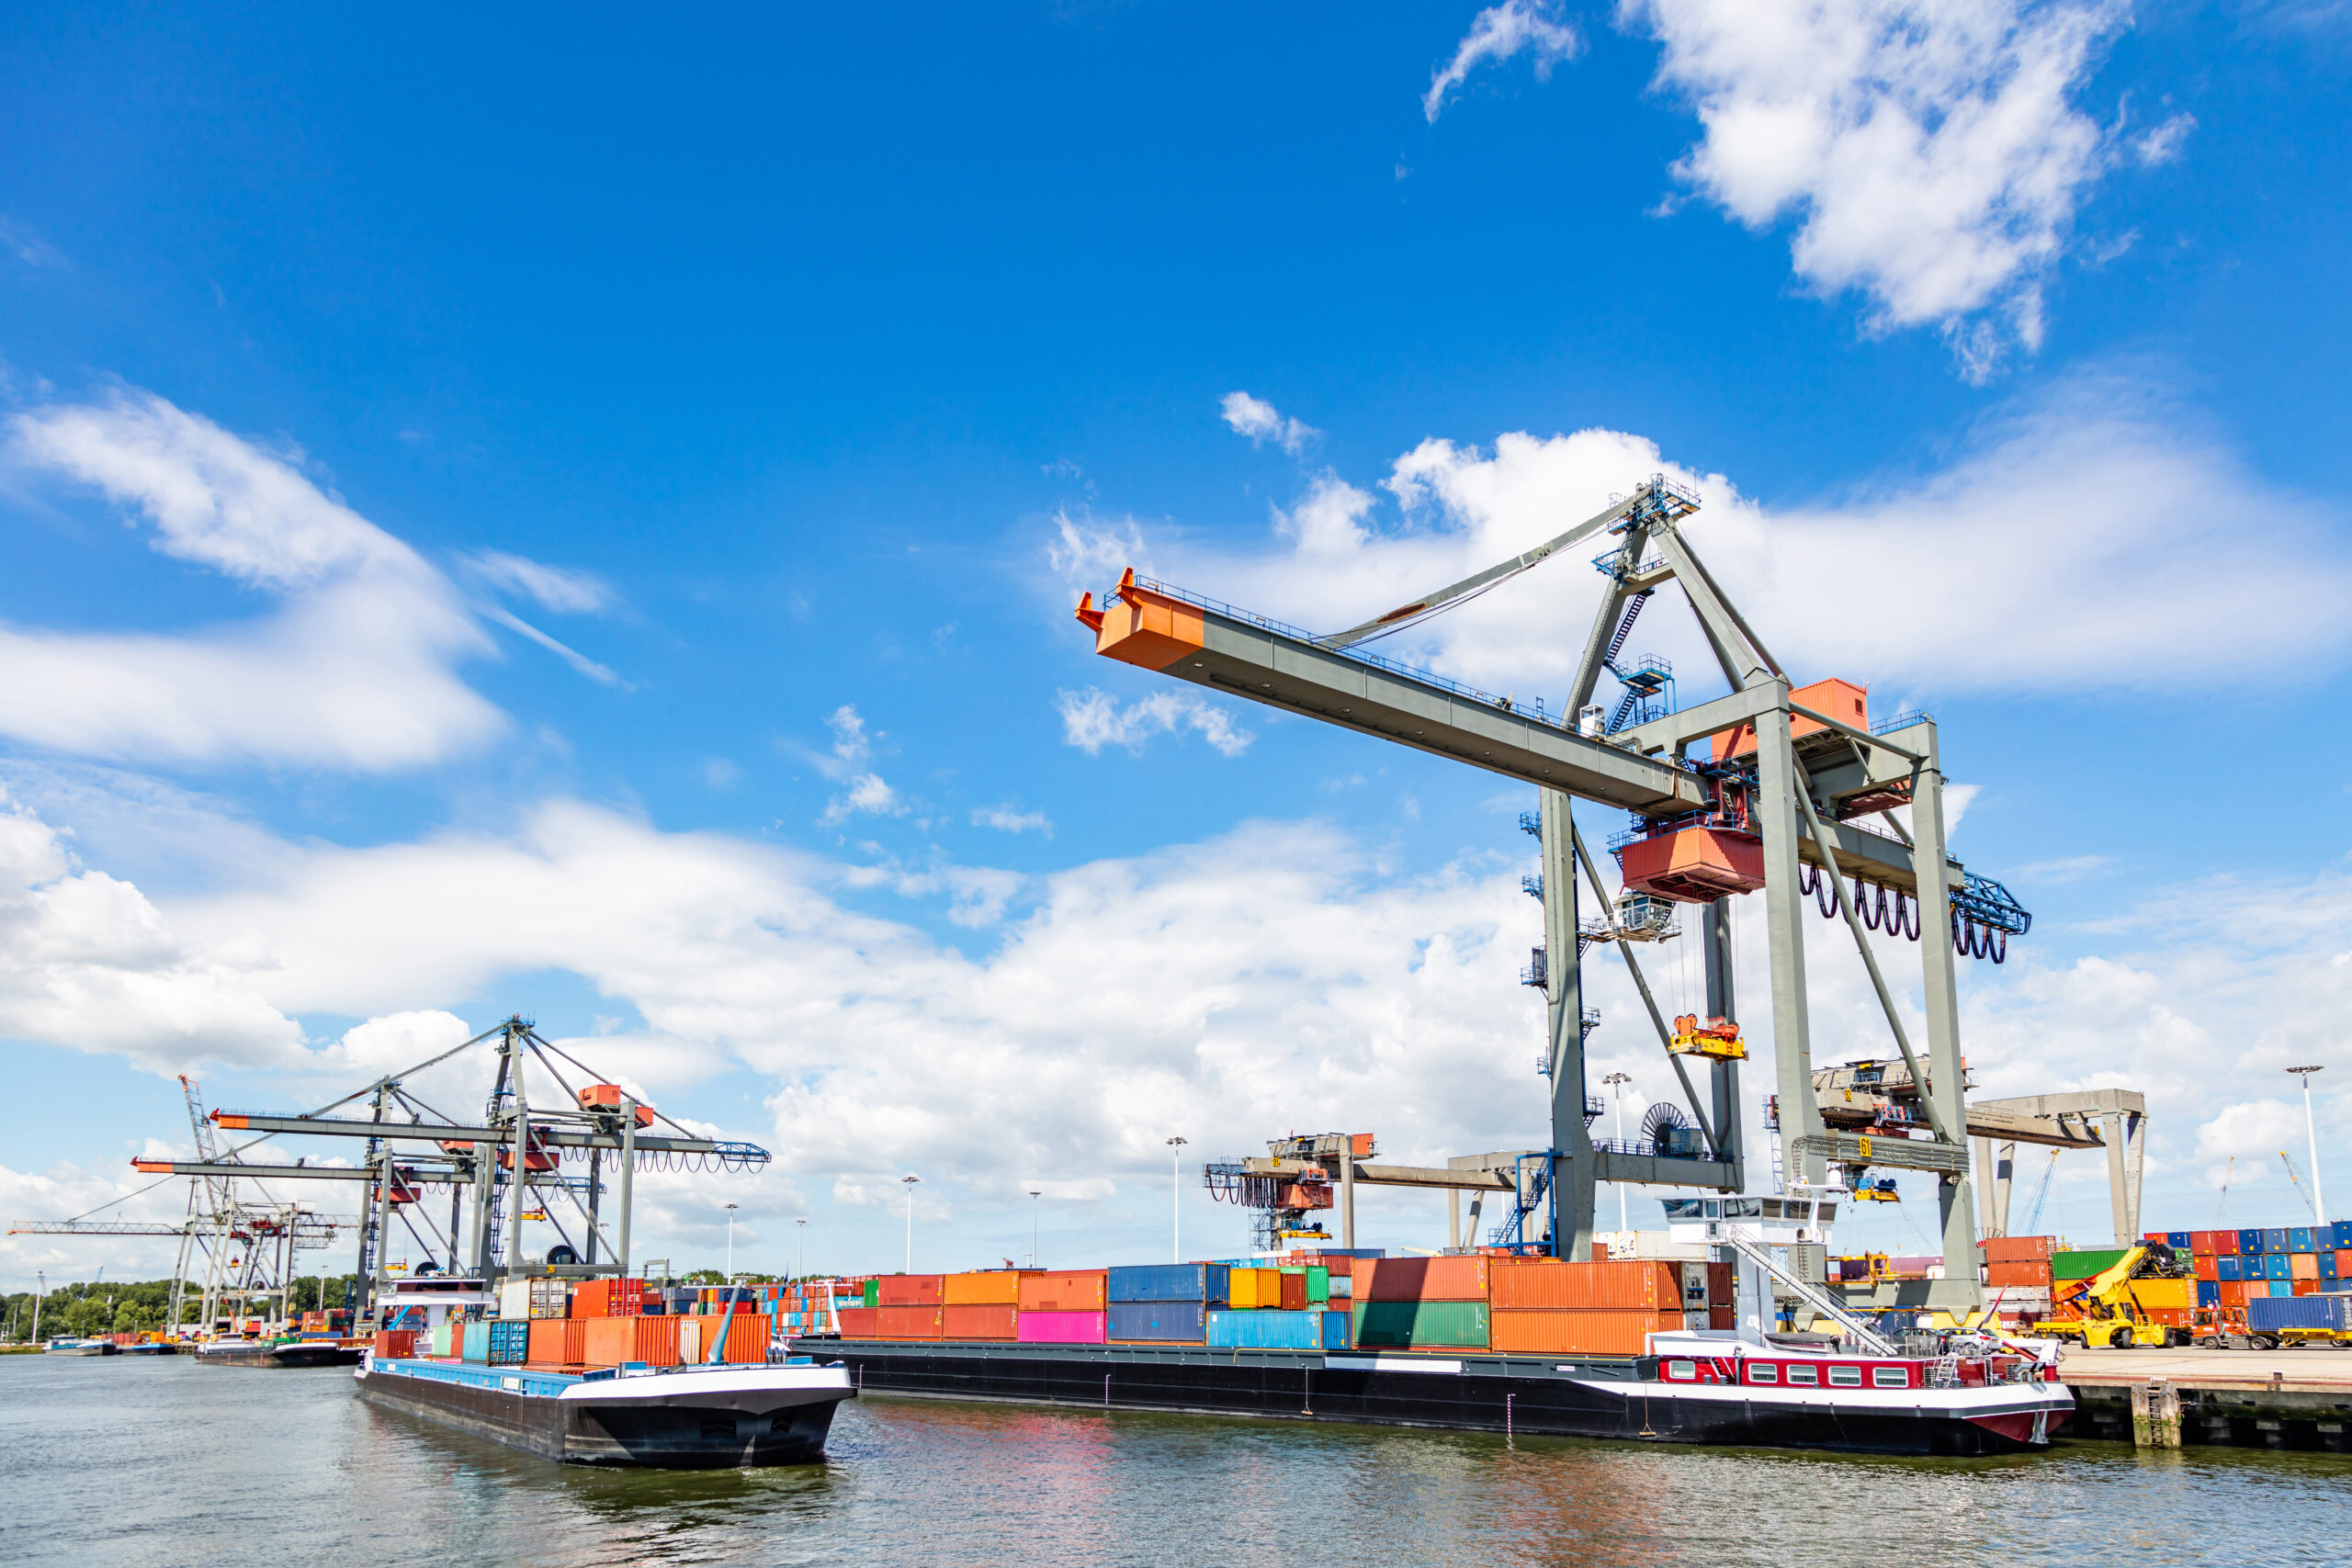 Shipping cargo being loaded by a crane on the international commercial harbor of Rotterdam, Netherlands, on a sunny day with blue skies and a few white clouds — Invest in Holland.